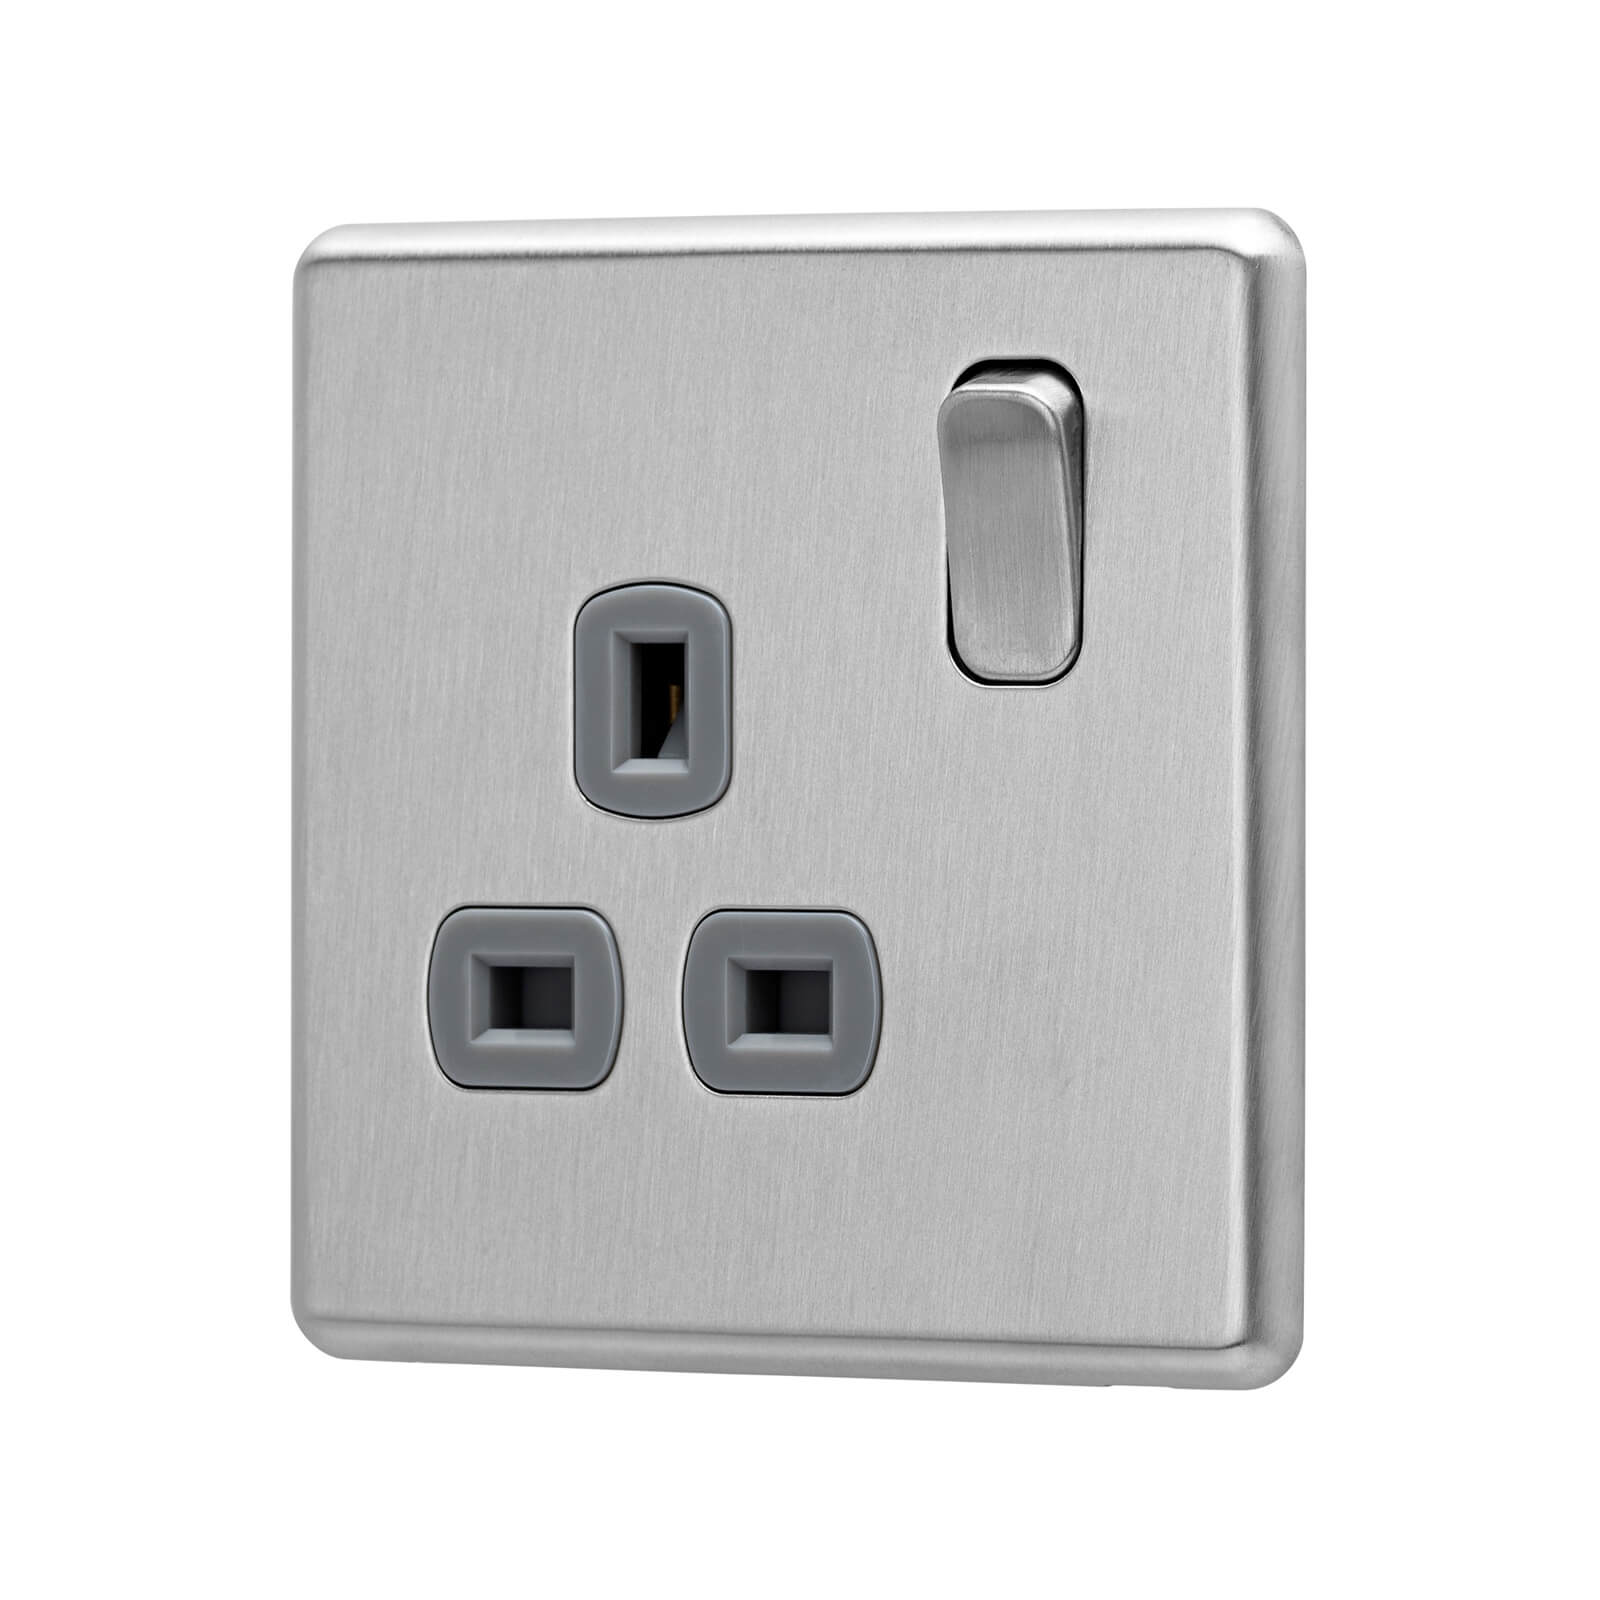 Photo of Arlec Fusion 13a 1 Gang Stainless Steel Single Switched Socket